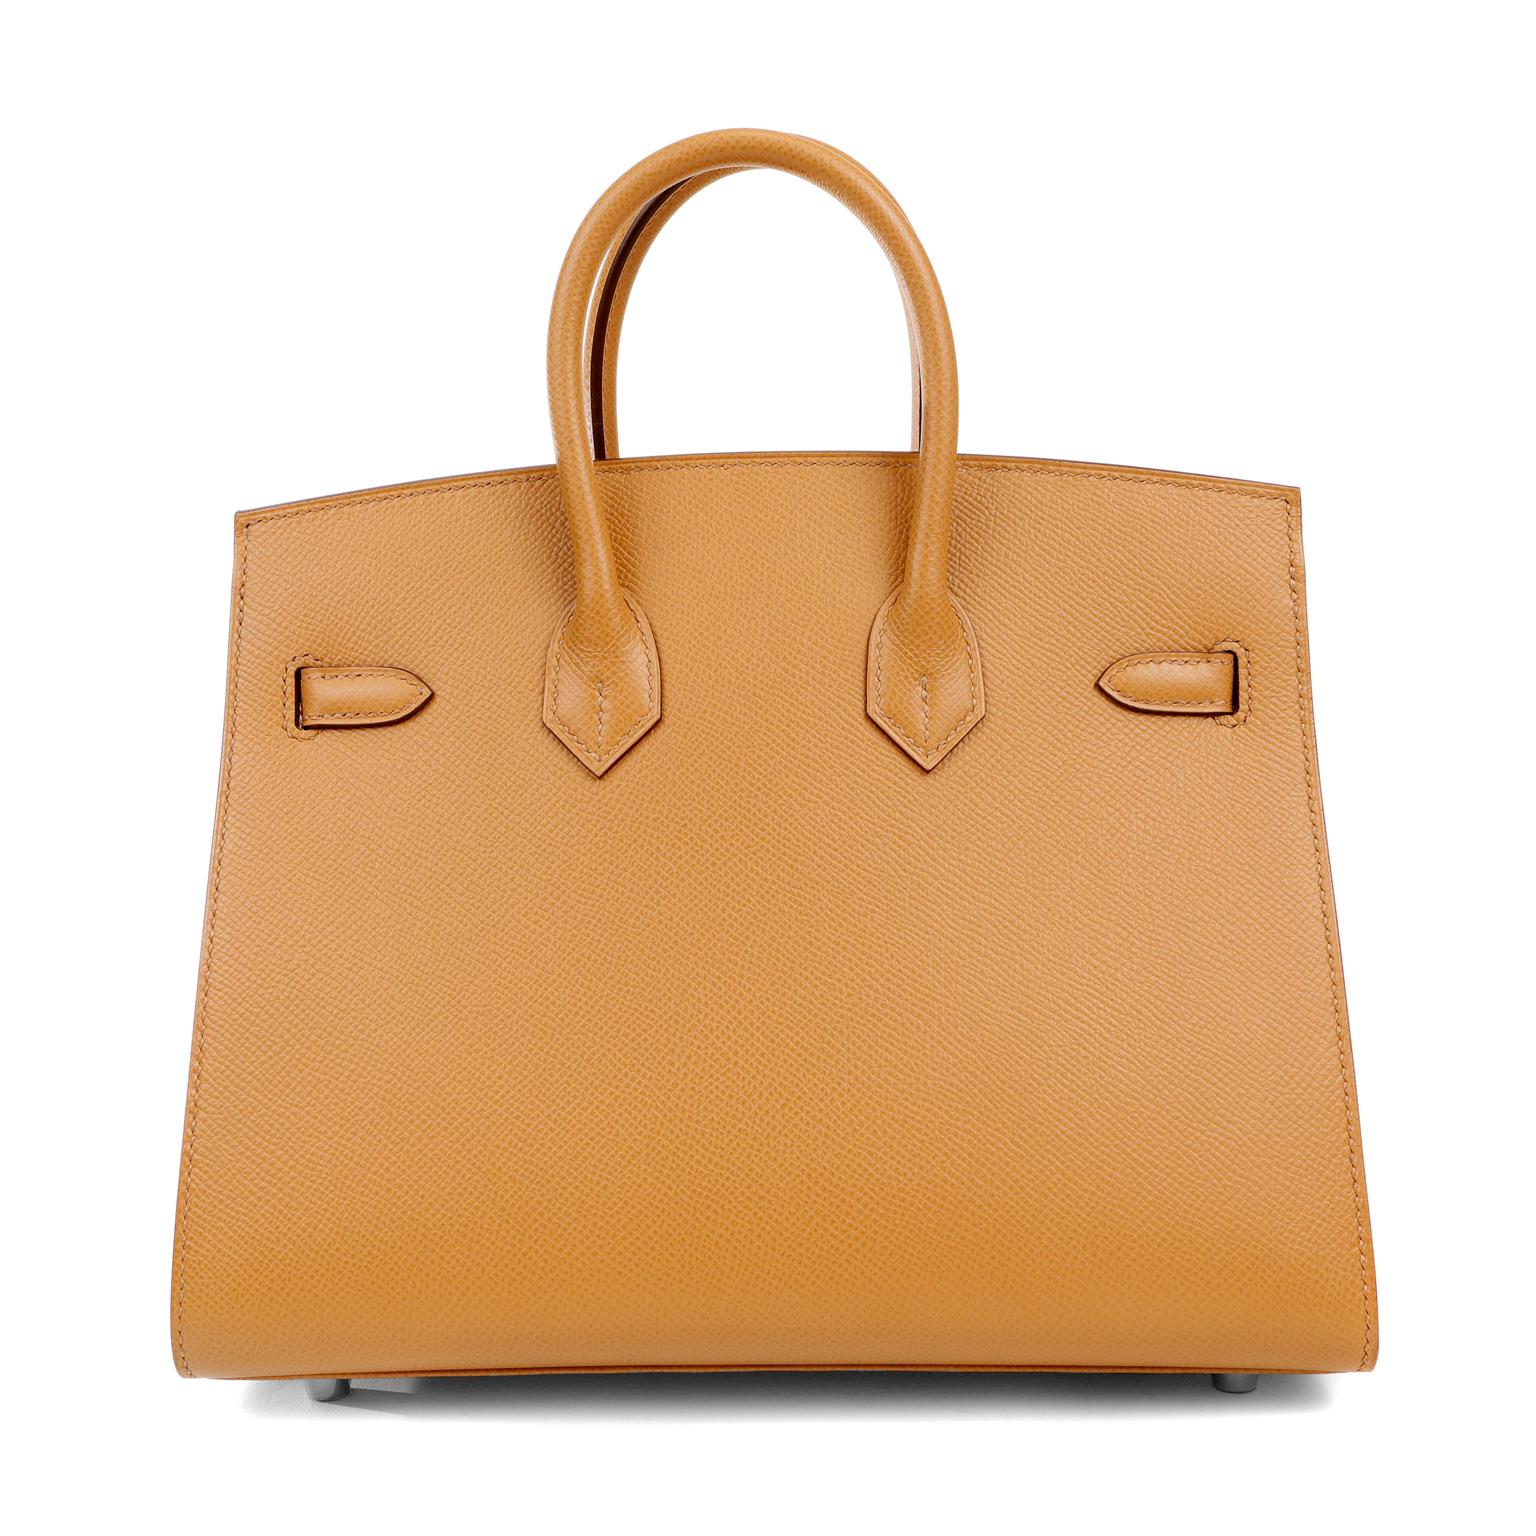 This authentic Hermès Trench Epsom 25 cm Sellier Birkin is in pristine unworn condition; the protective plastic is still intact on the hardware.    Considered the ultimate luxury item, the Hermès Birkin is stitched by hand. Waitlists are commonplace